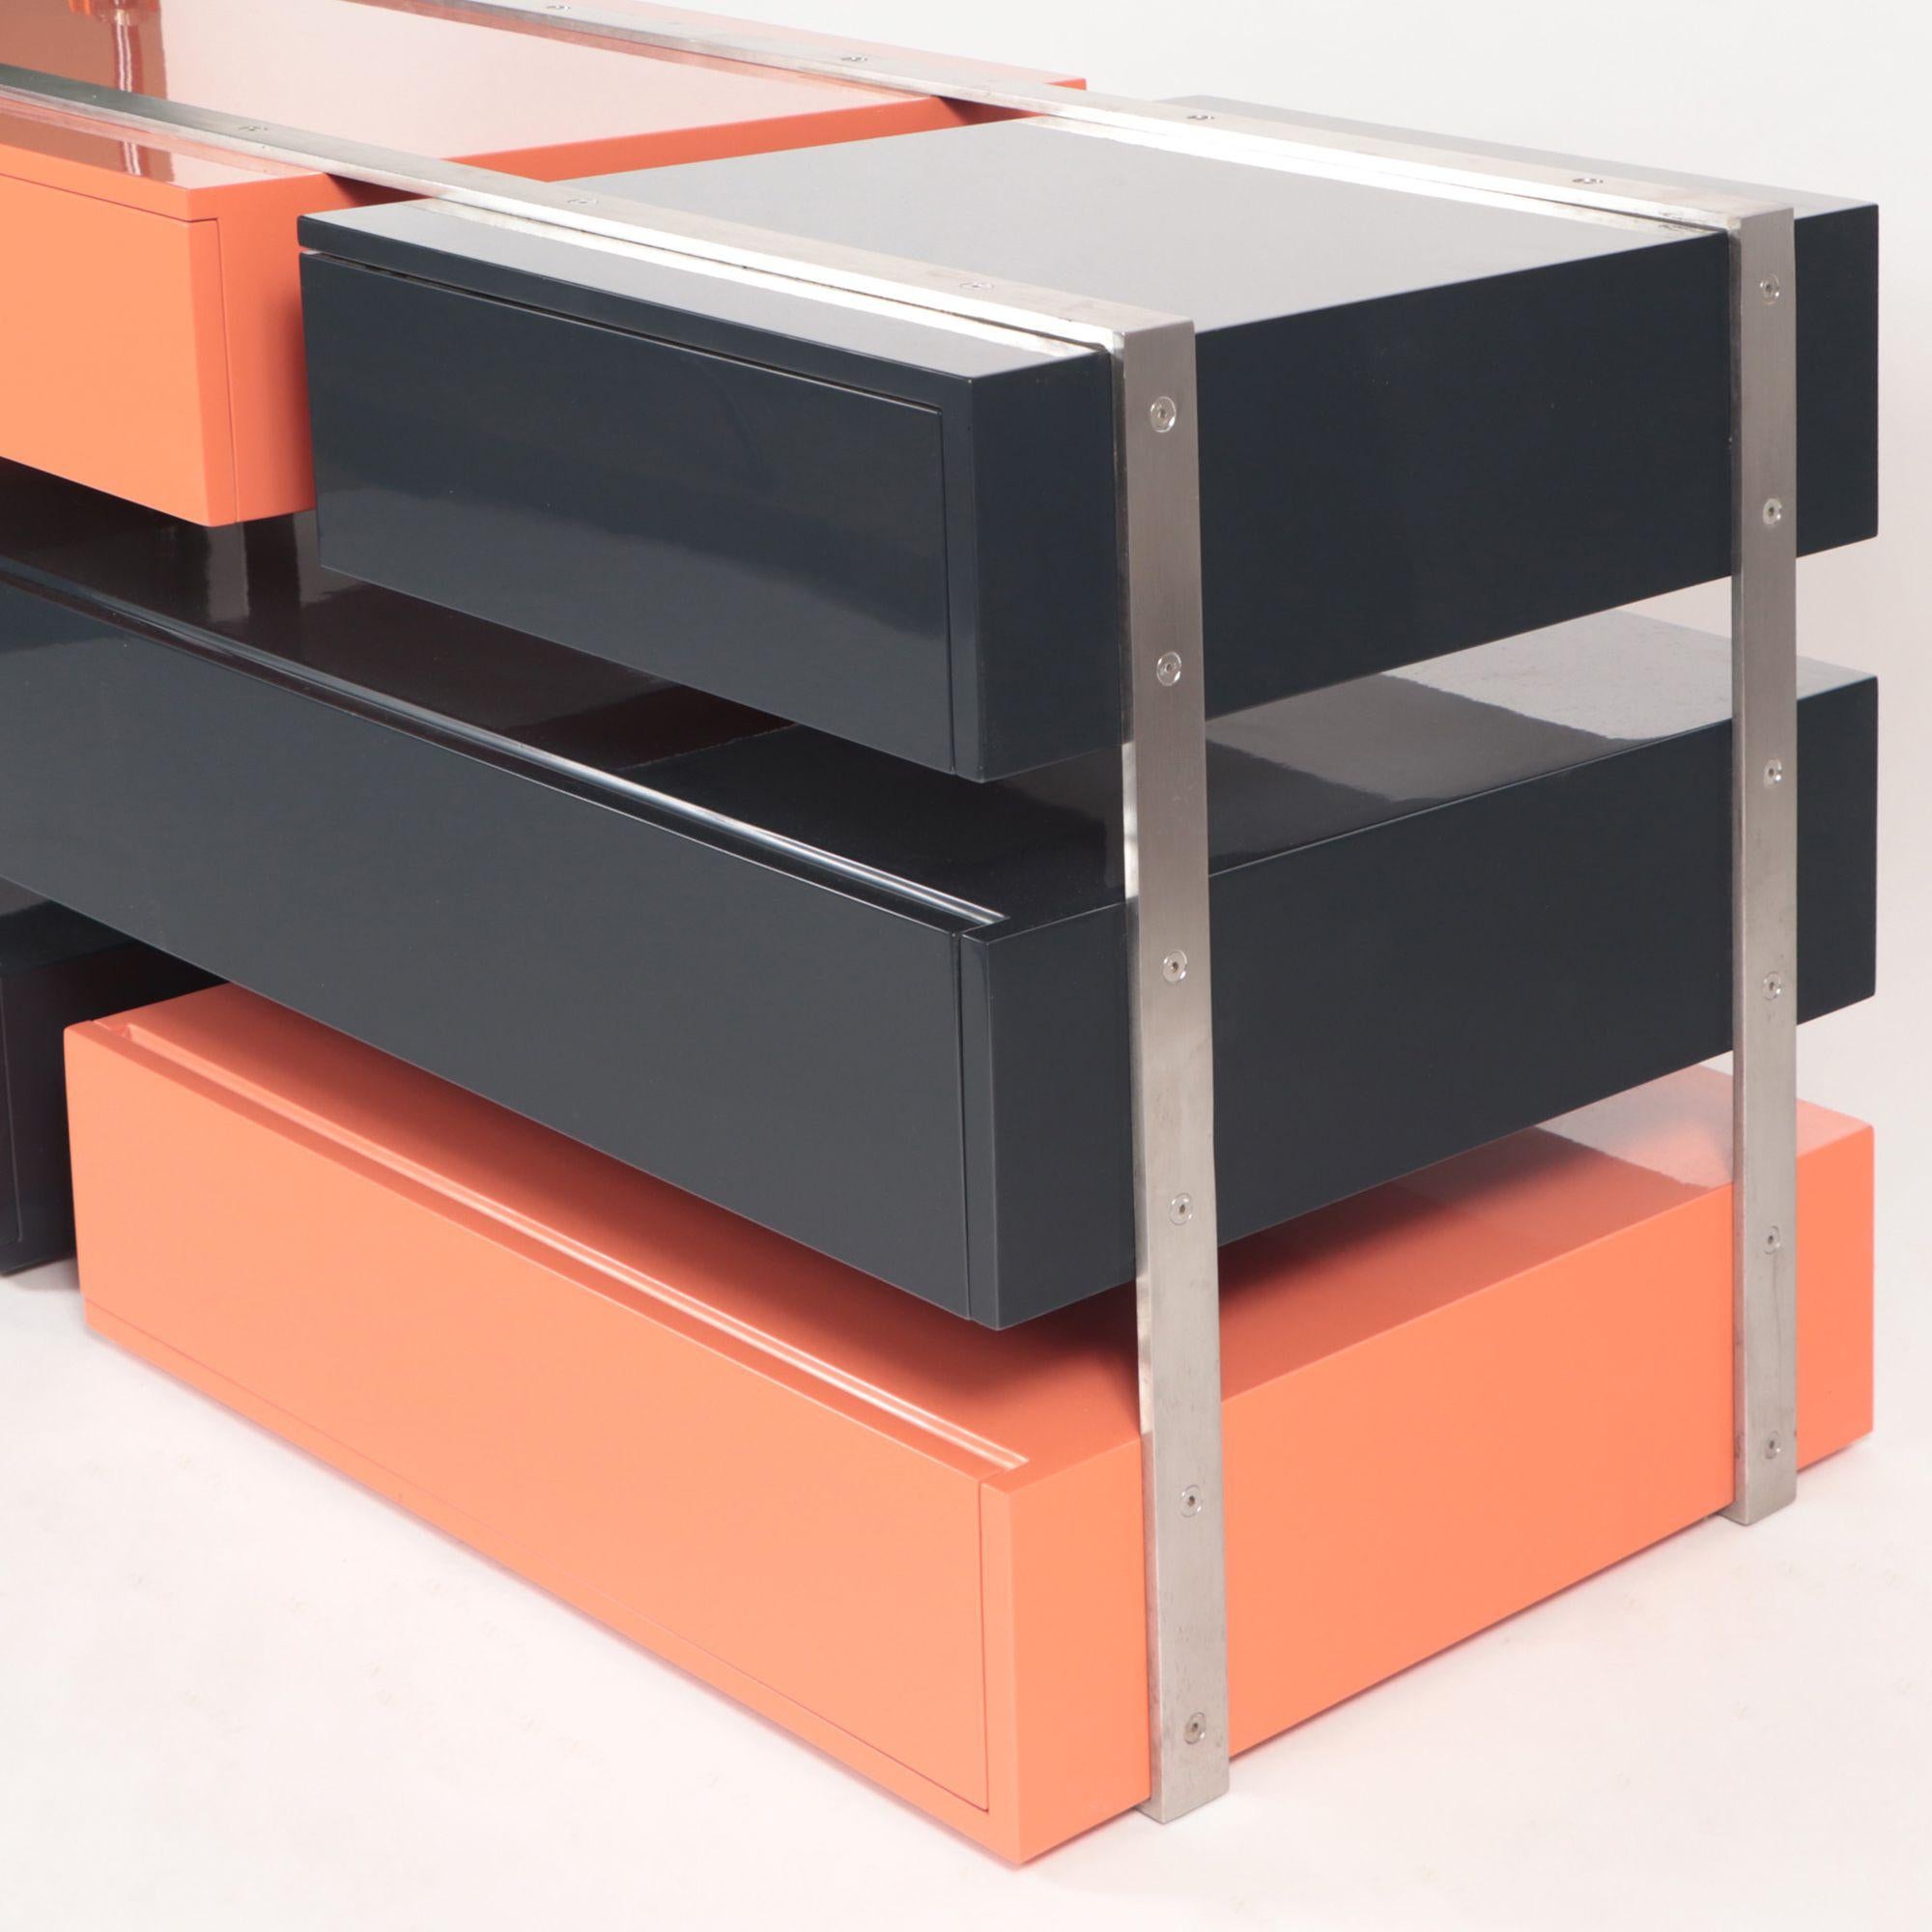 Designed by Maximilian Eicke for his brand Max ID NY.
 
This sculptural and functional dresser is made with high gloss lacquered drawers wrapped by solid brushed stainless steel 